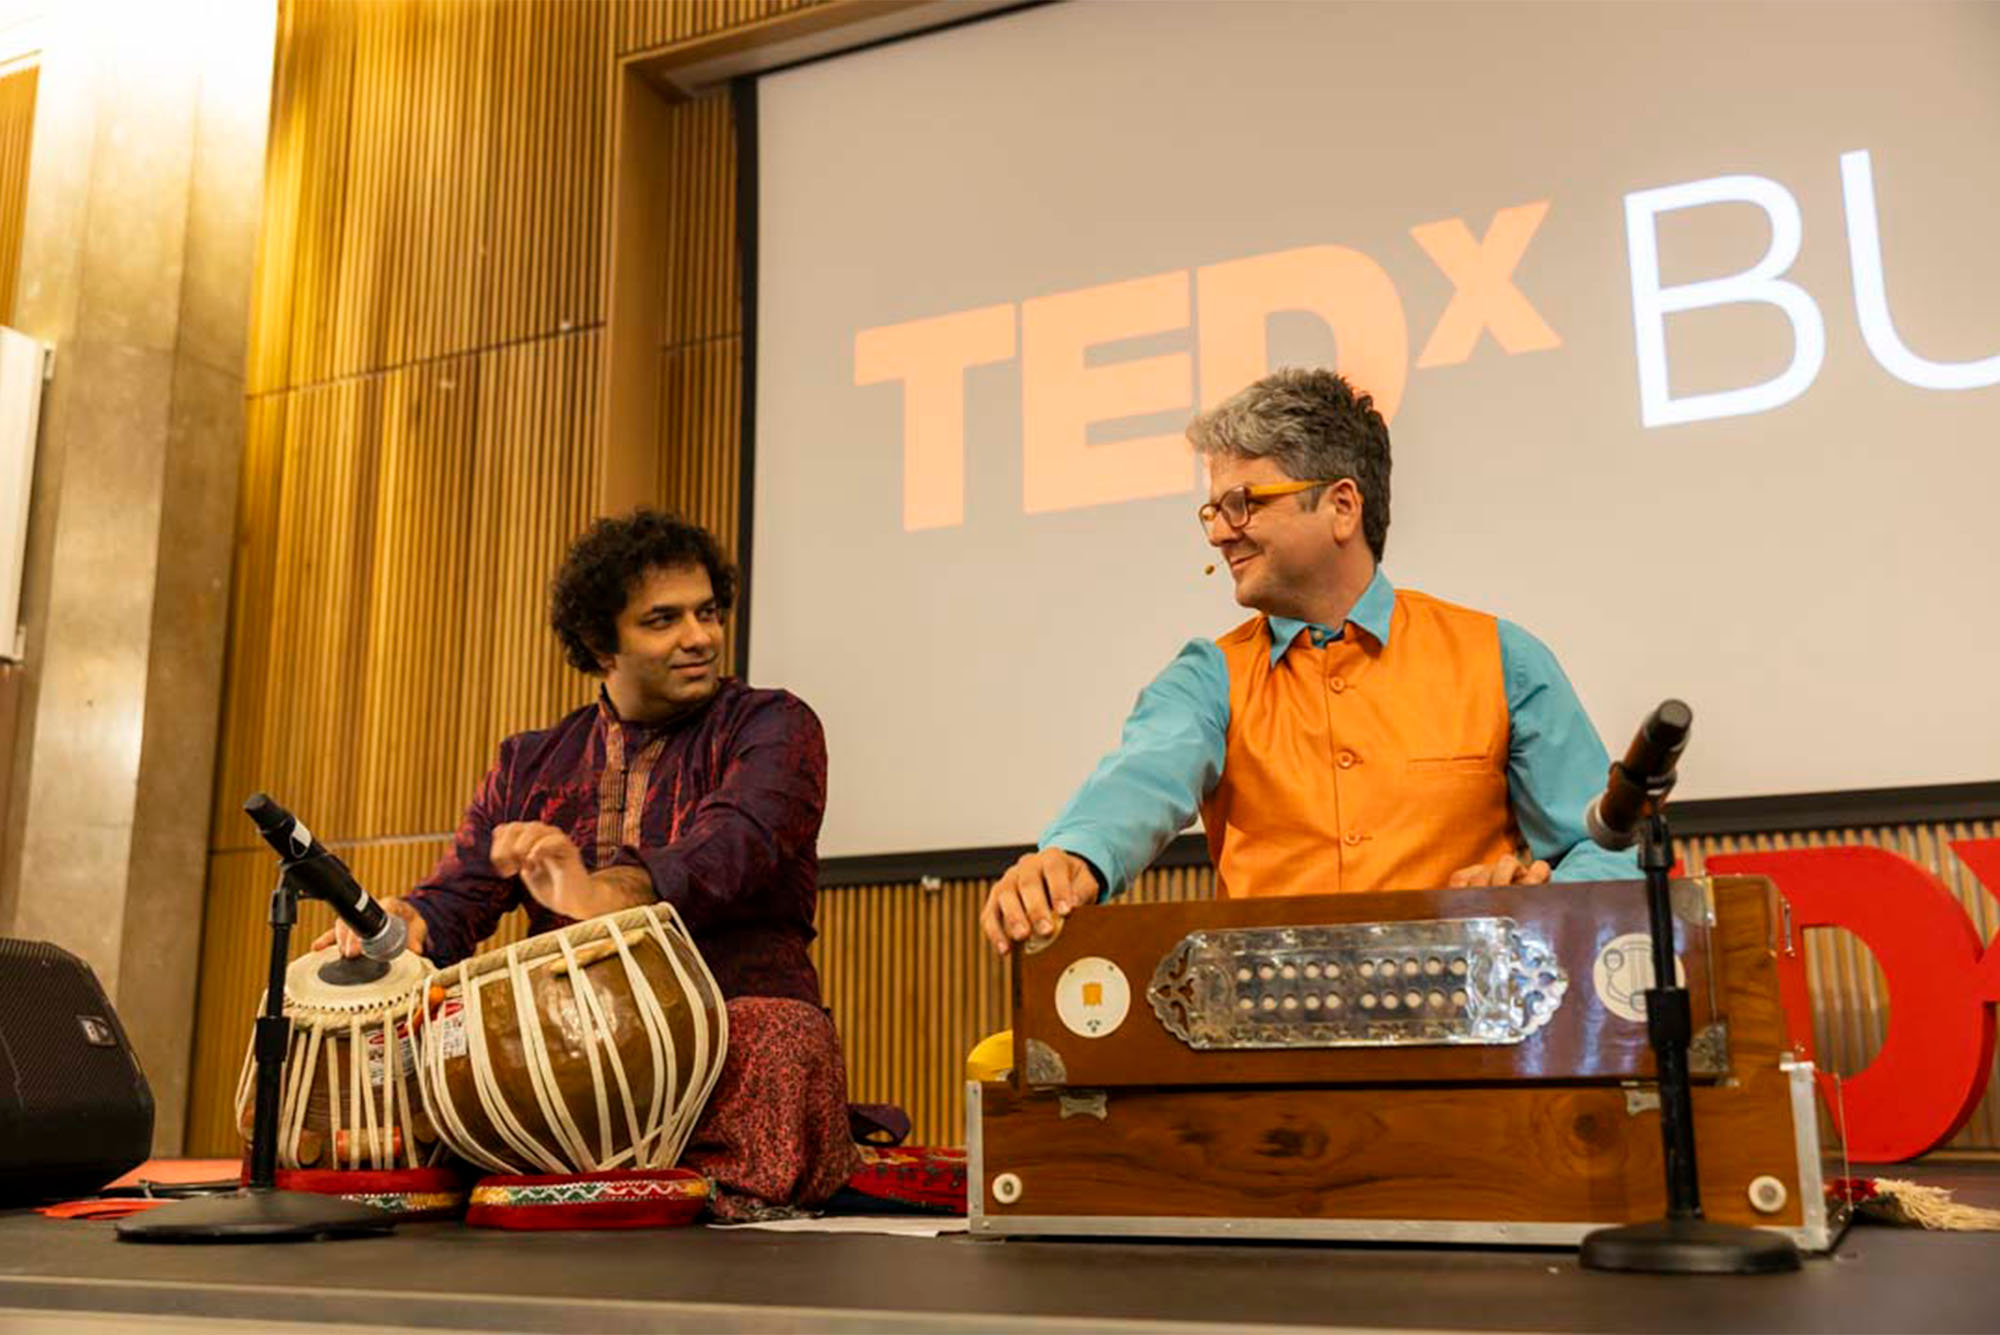 Photo: Amit Kavthekar (left), an Indian Tabla musician, and Igor Iwanek, a College of Fine Arts lecturer in performance, guided the audience in a breathwork exercise and played rhythmic music during their time on stage.